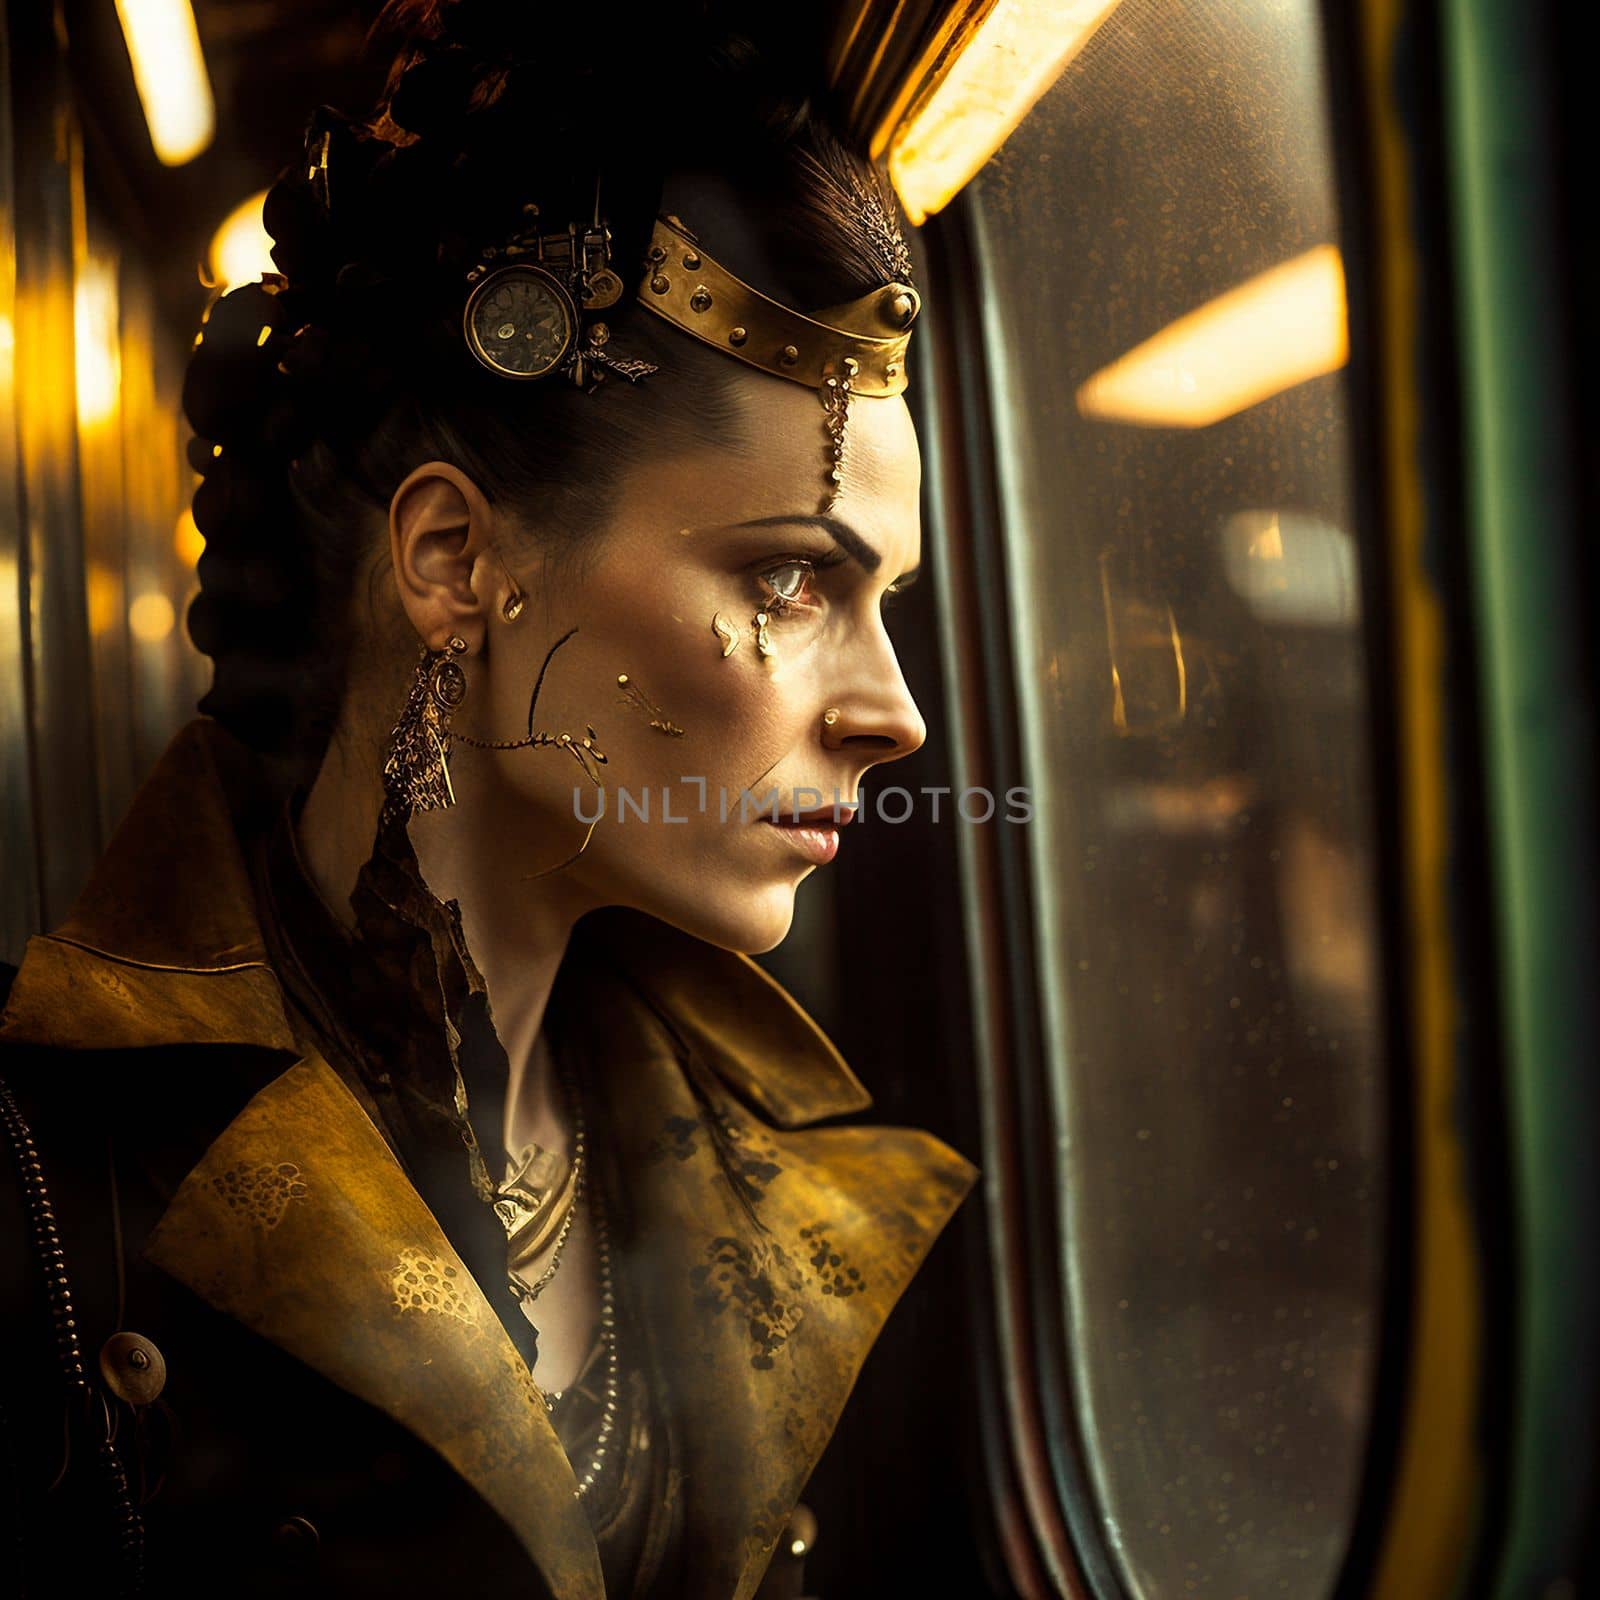 The woman is on the train. Cyberpunk art. High quality illustration